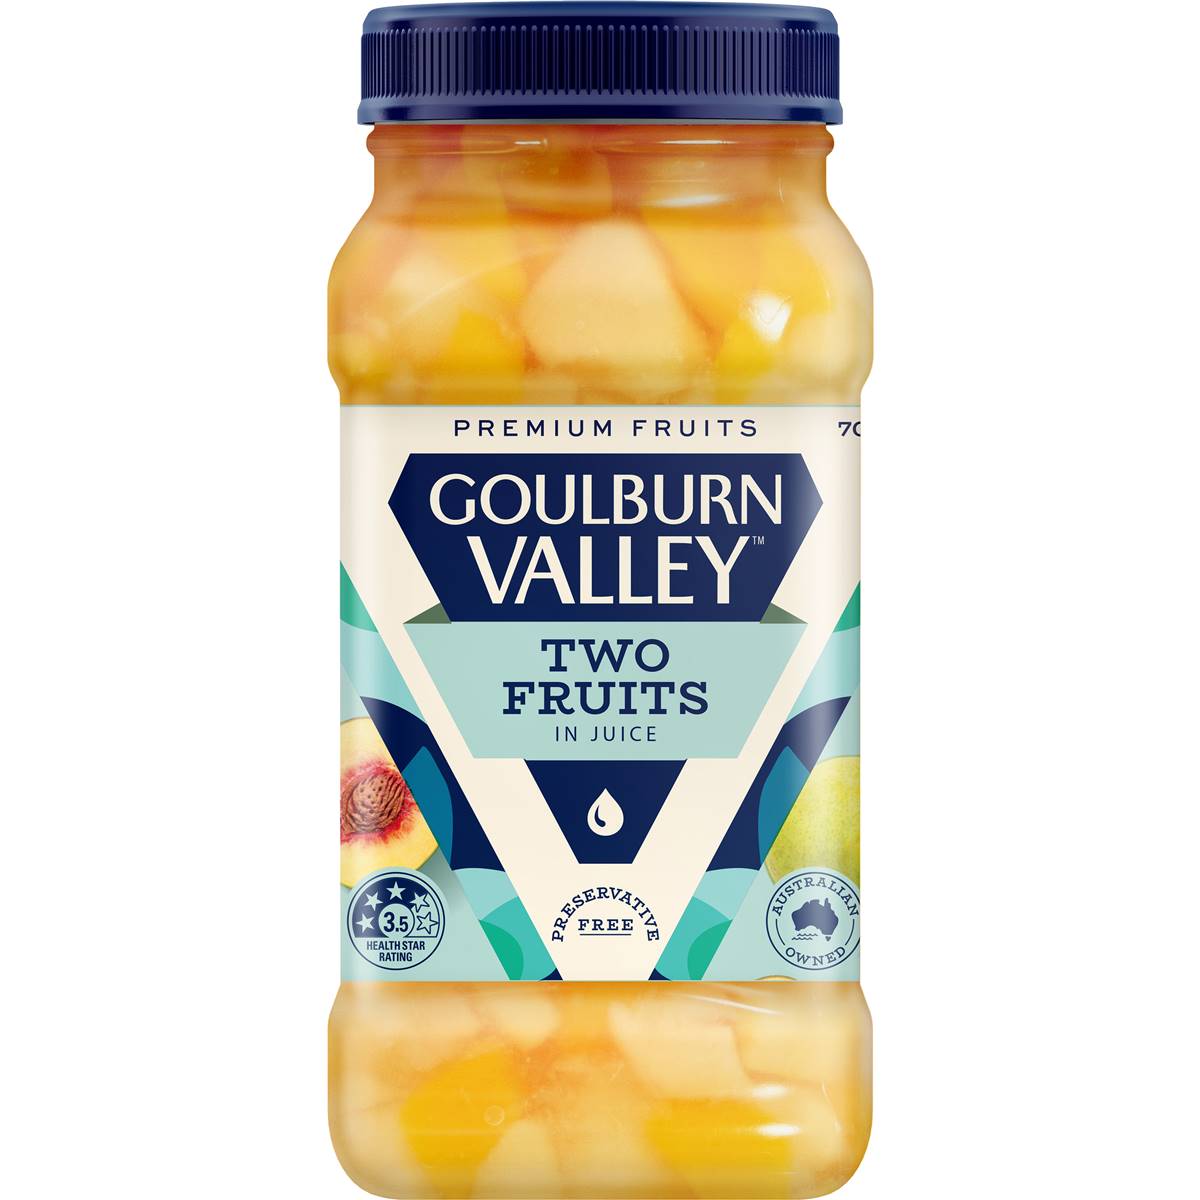 Calories in Goulburn Valley Two Fruits In Juice